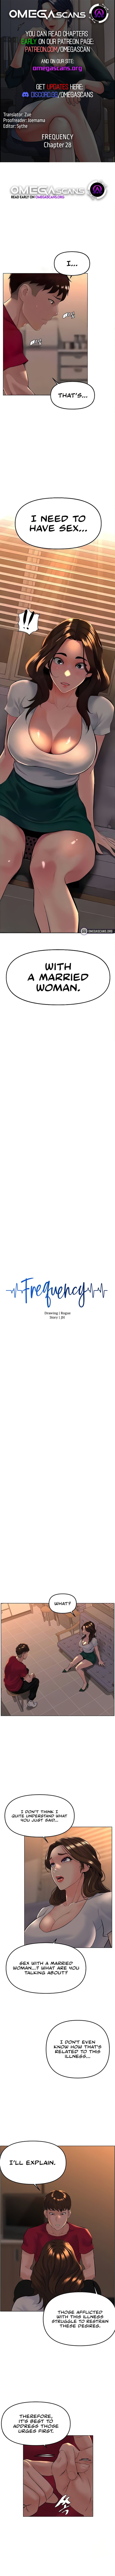 frequency-chap-28-0